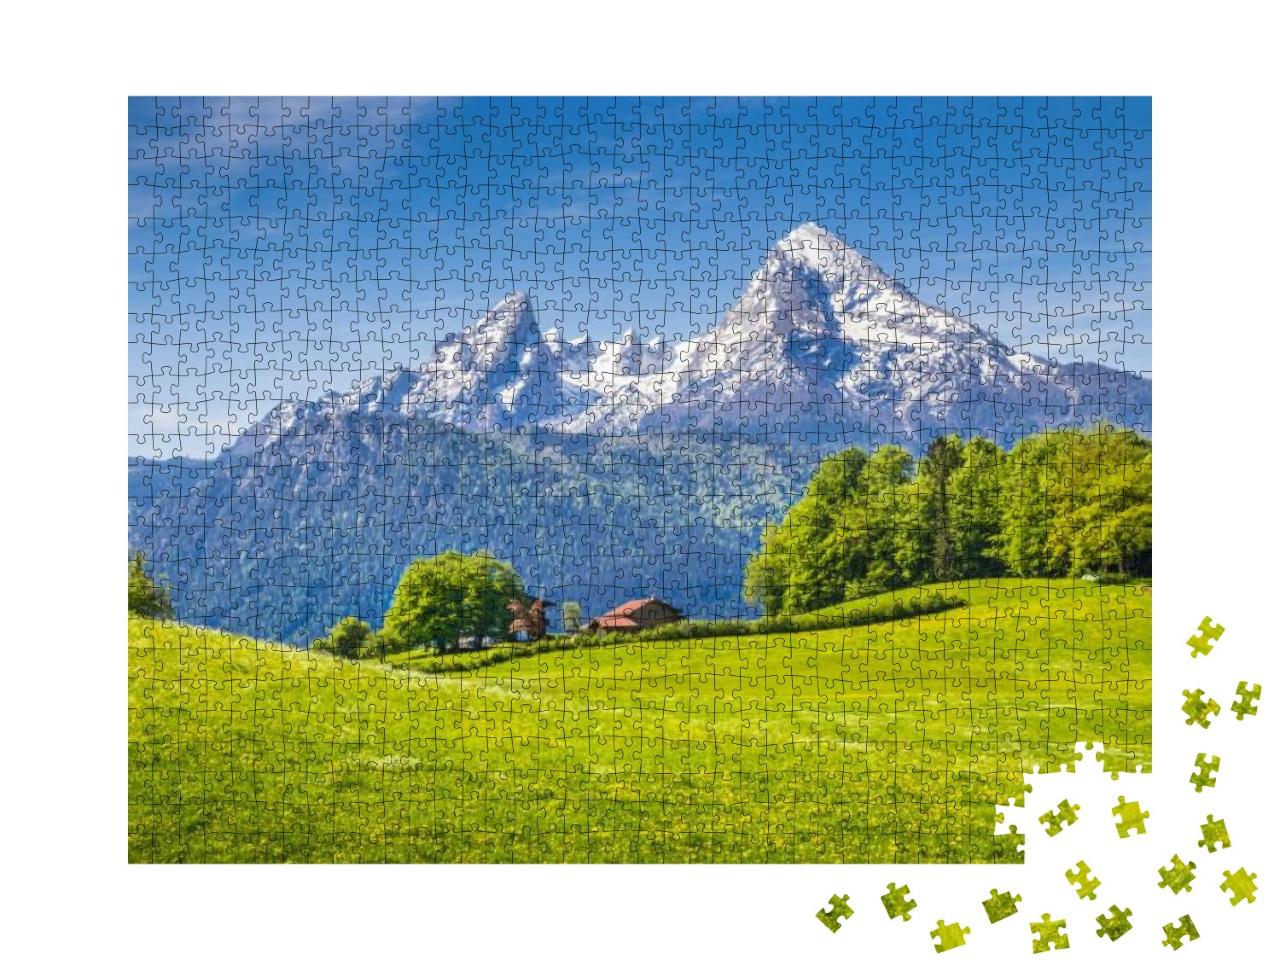 Idyllic Landscape in the Alps with Fresh Green Meadows &... Jigsaw Puzzle with 1000 pieces